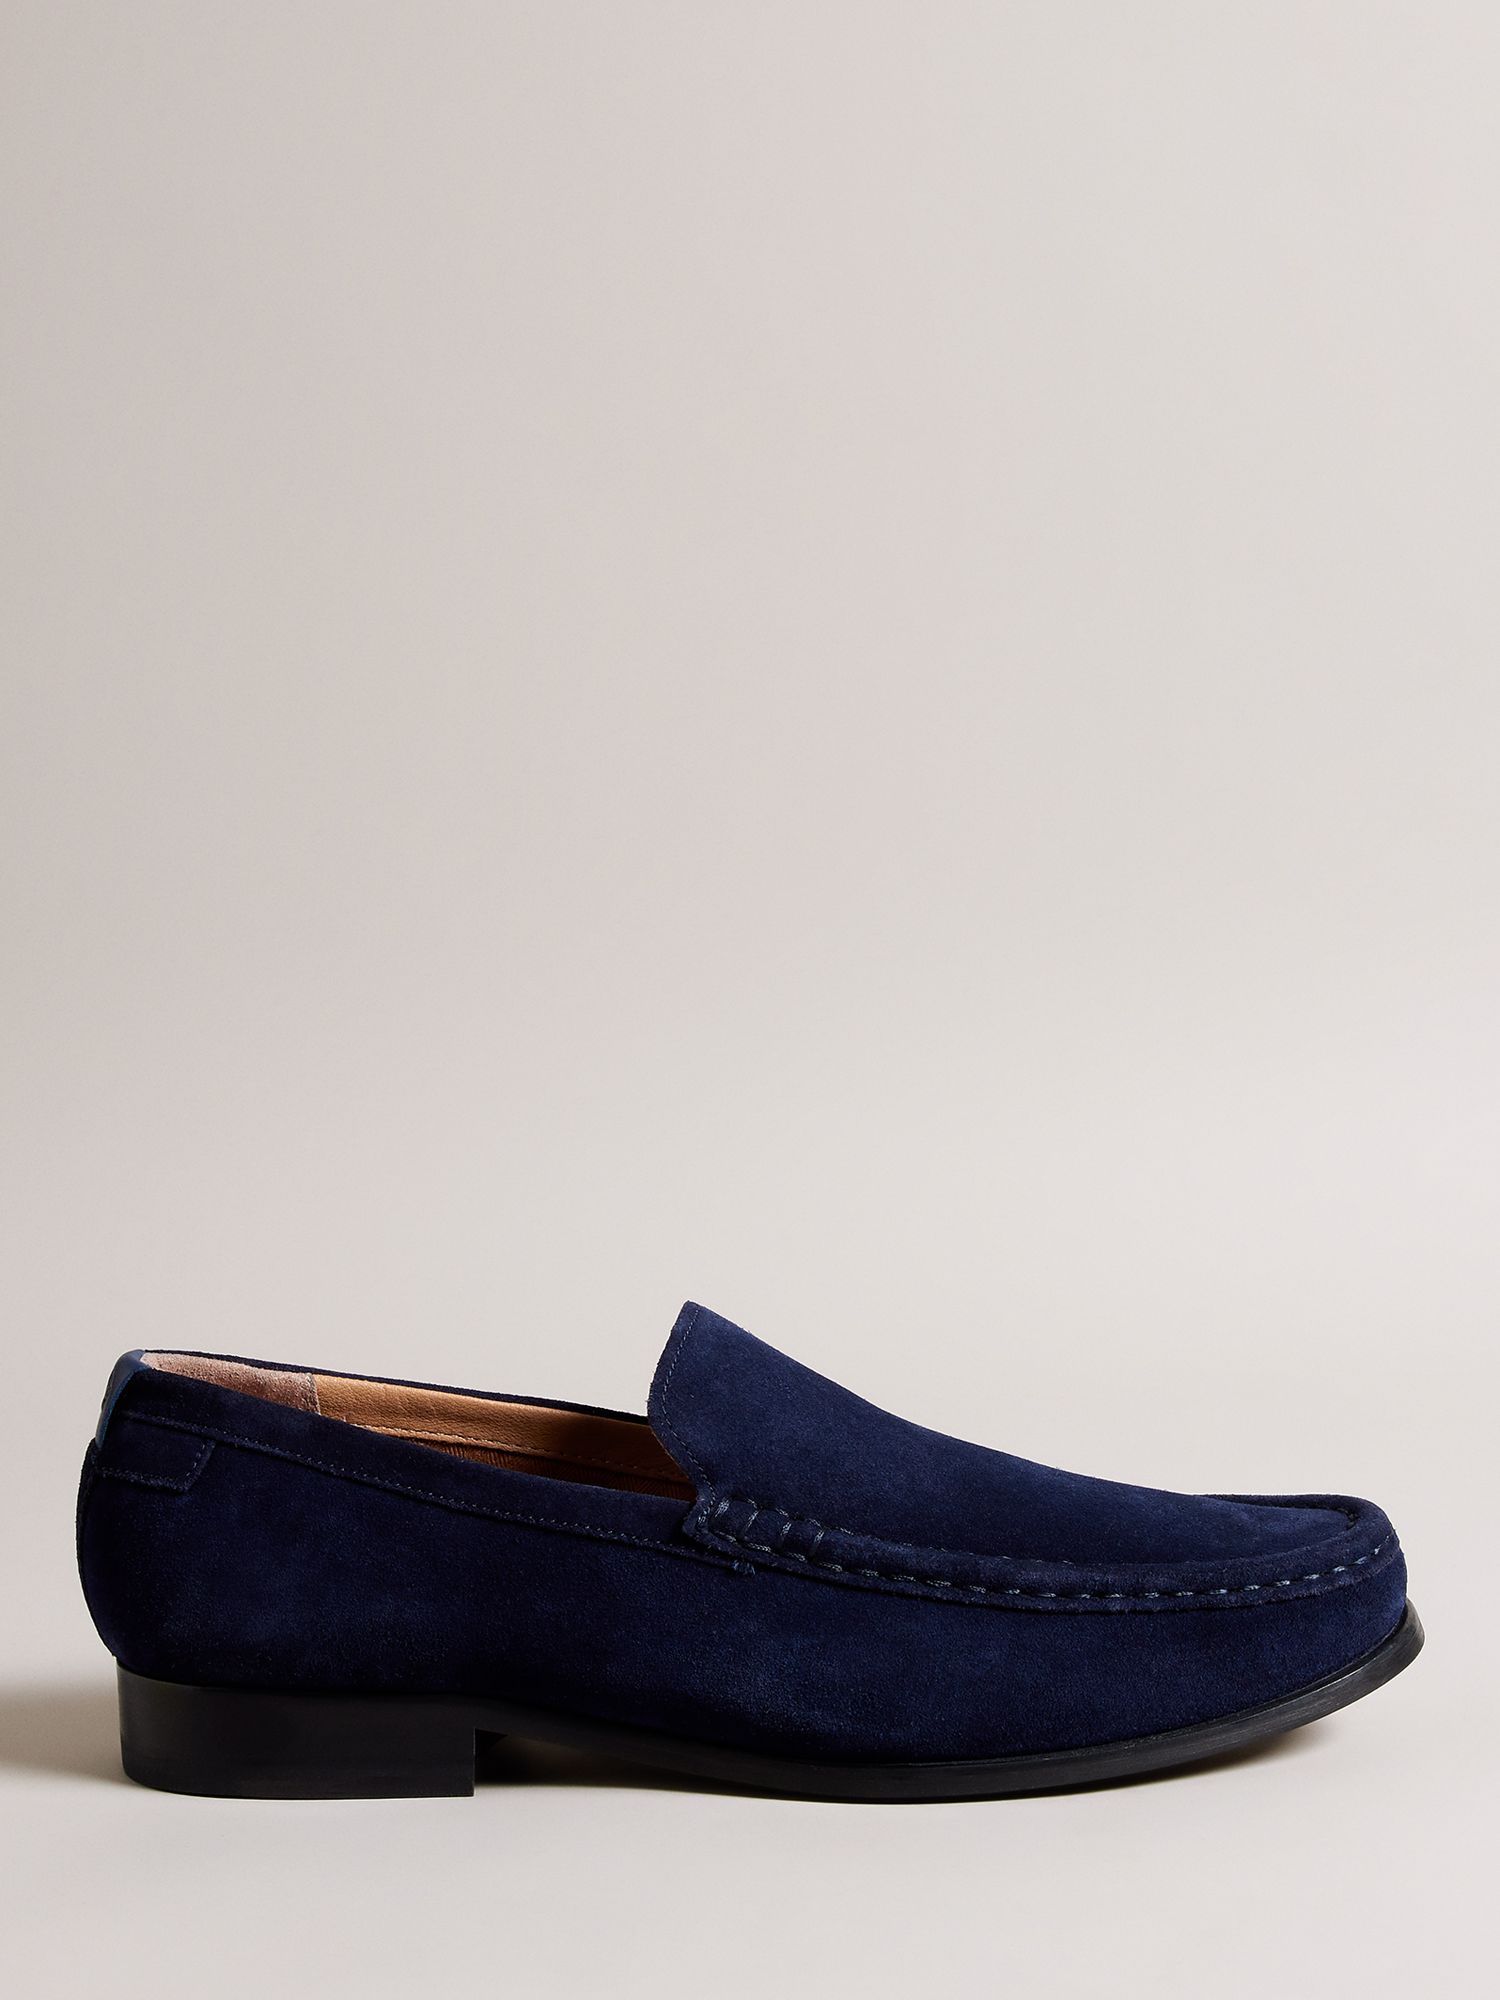 Ted Baker Labis Suede Loafers, Navy at John Lewis & Partners